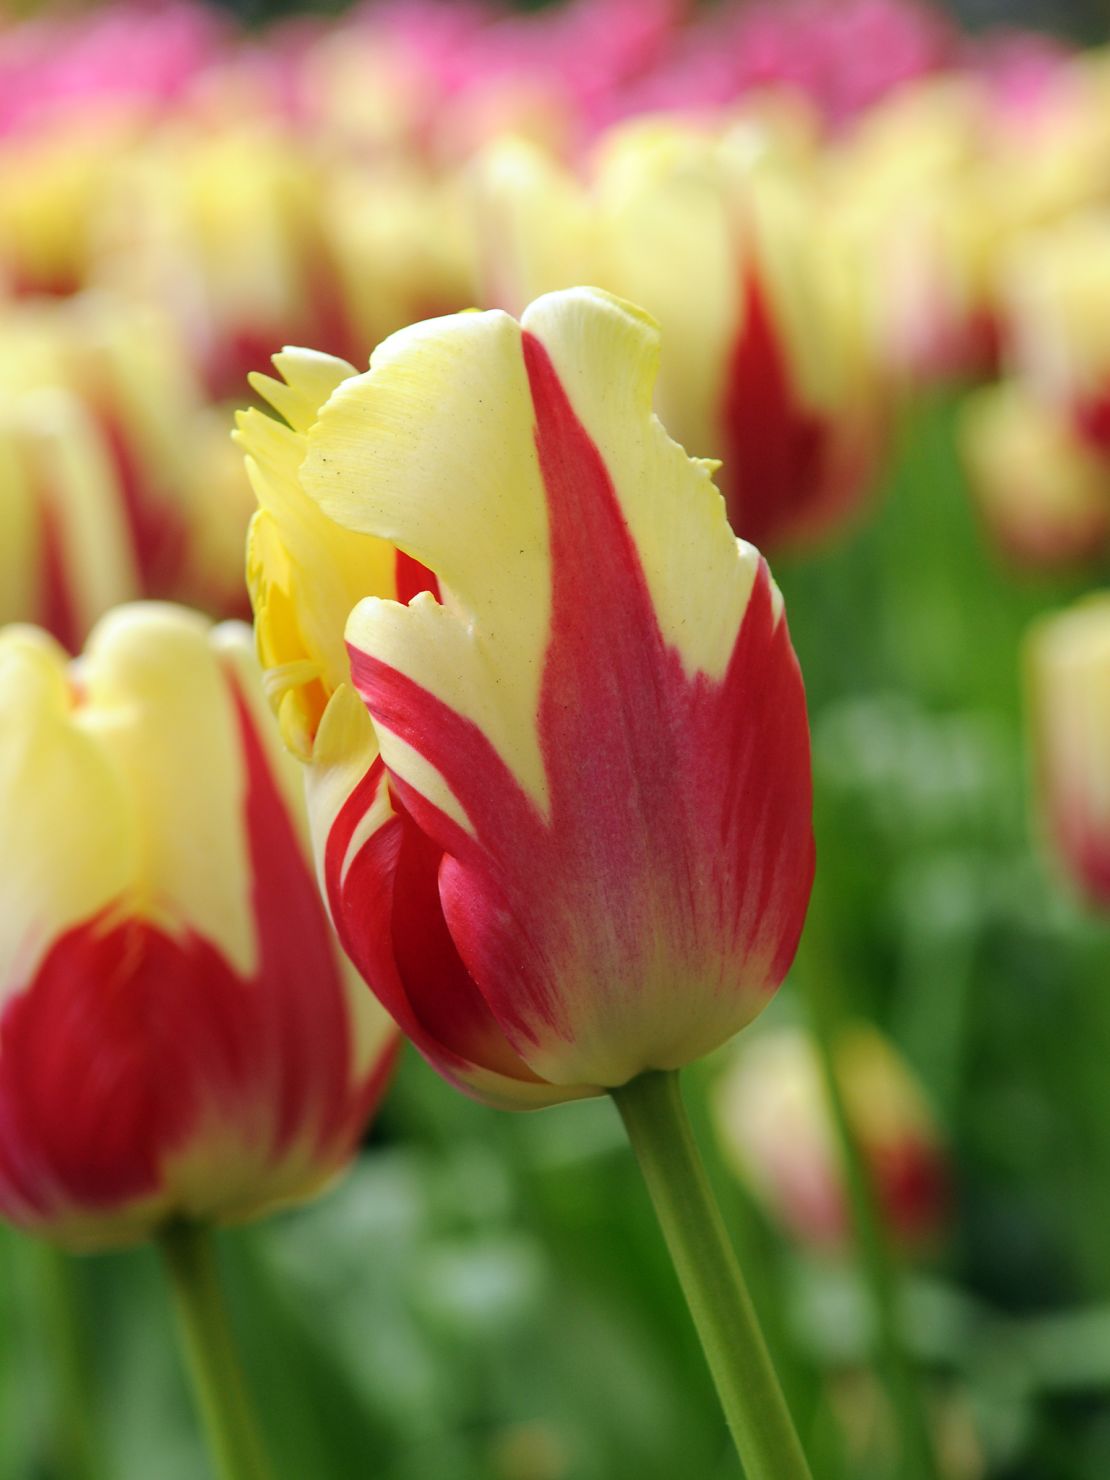 <em>Shown here: Tulipa 'Texas Flame' which has big "flaming" yellow and red blooms.</em>